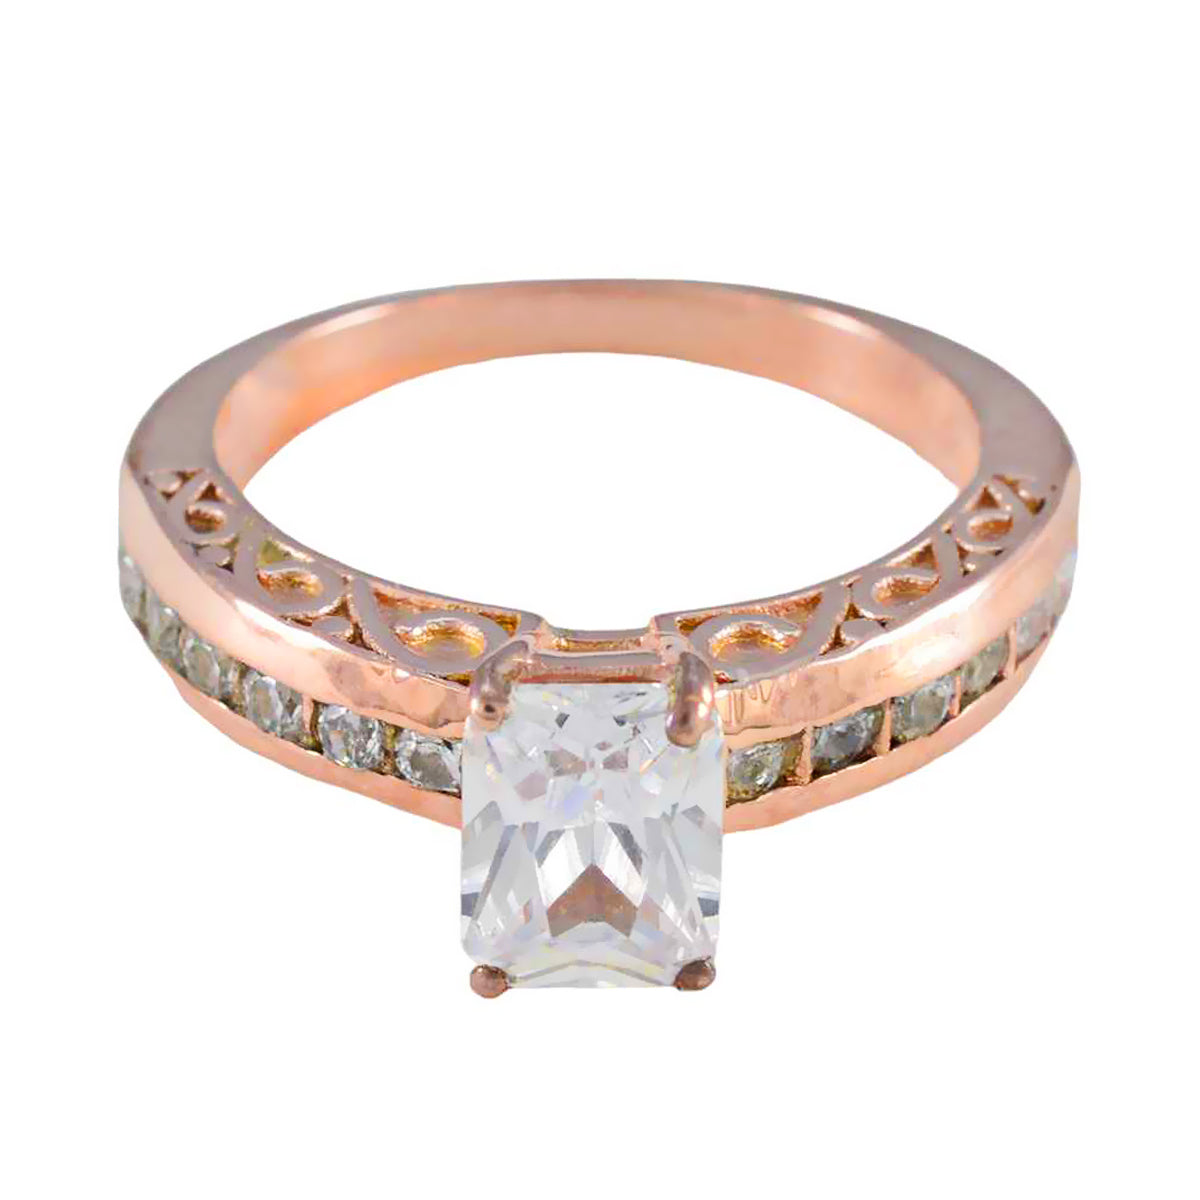 Riyo Mature Silver Ring With Rose Gold Plating White CZ Stone Octagon Shape Prong Setting Fashion Jewelry Valentines Day Ring